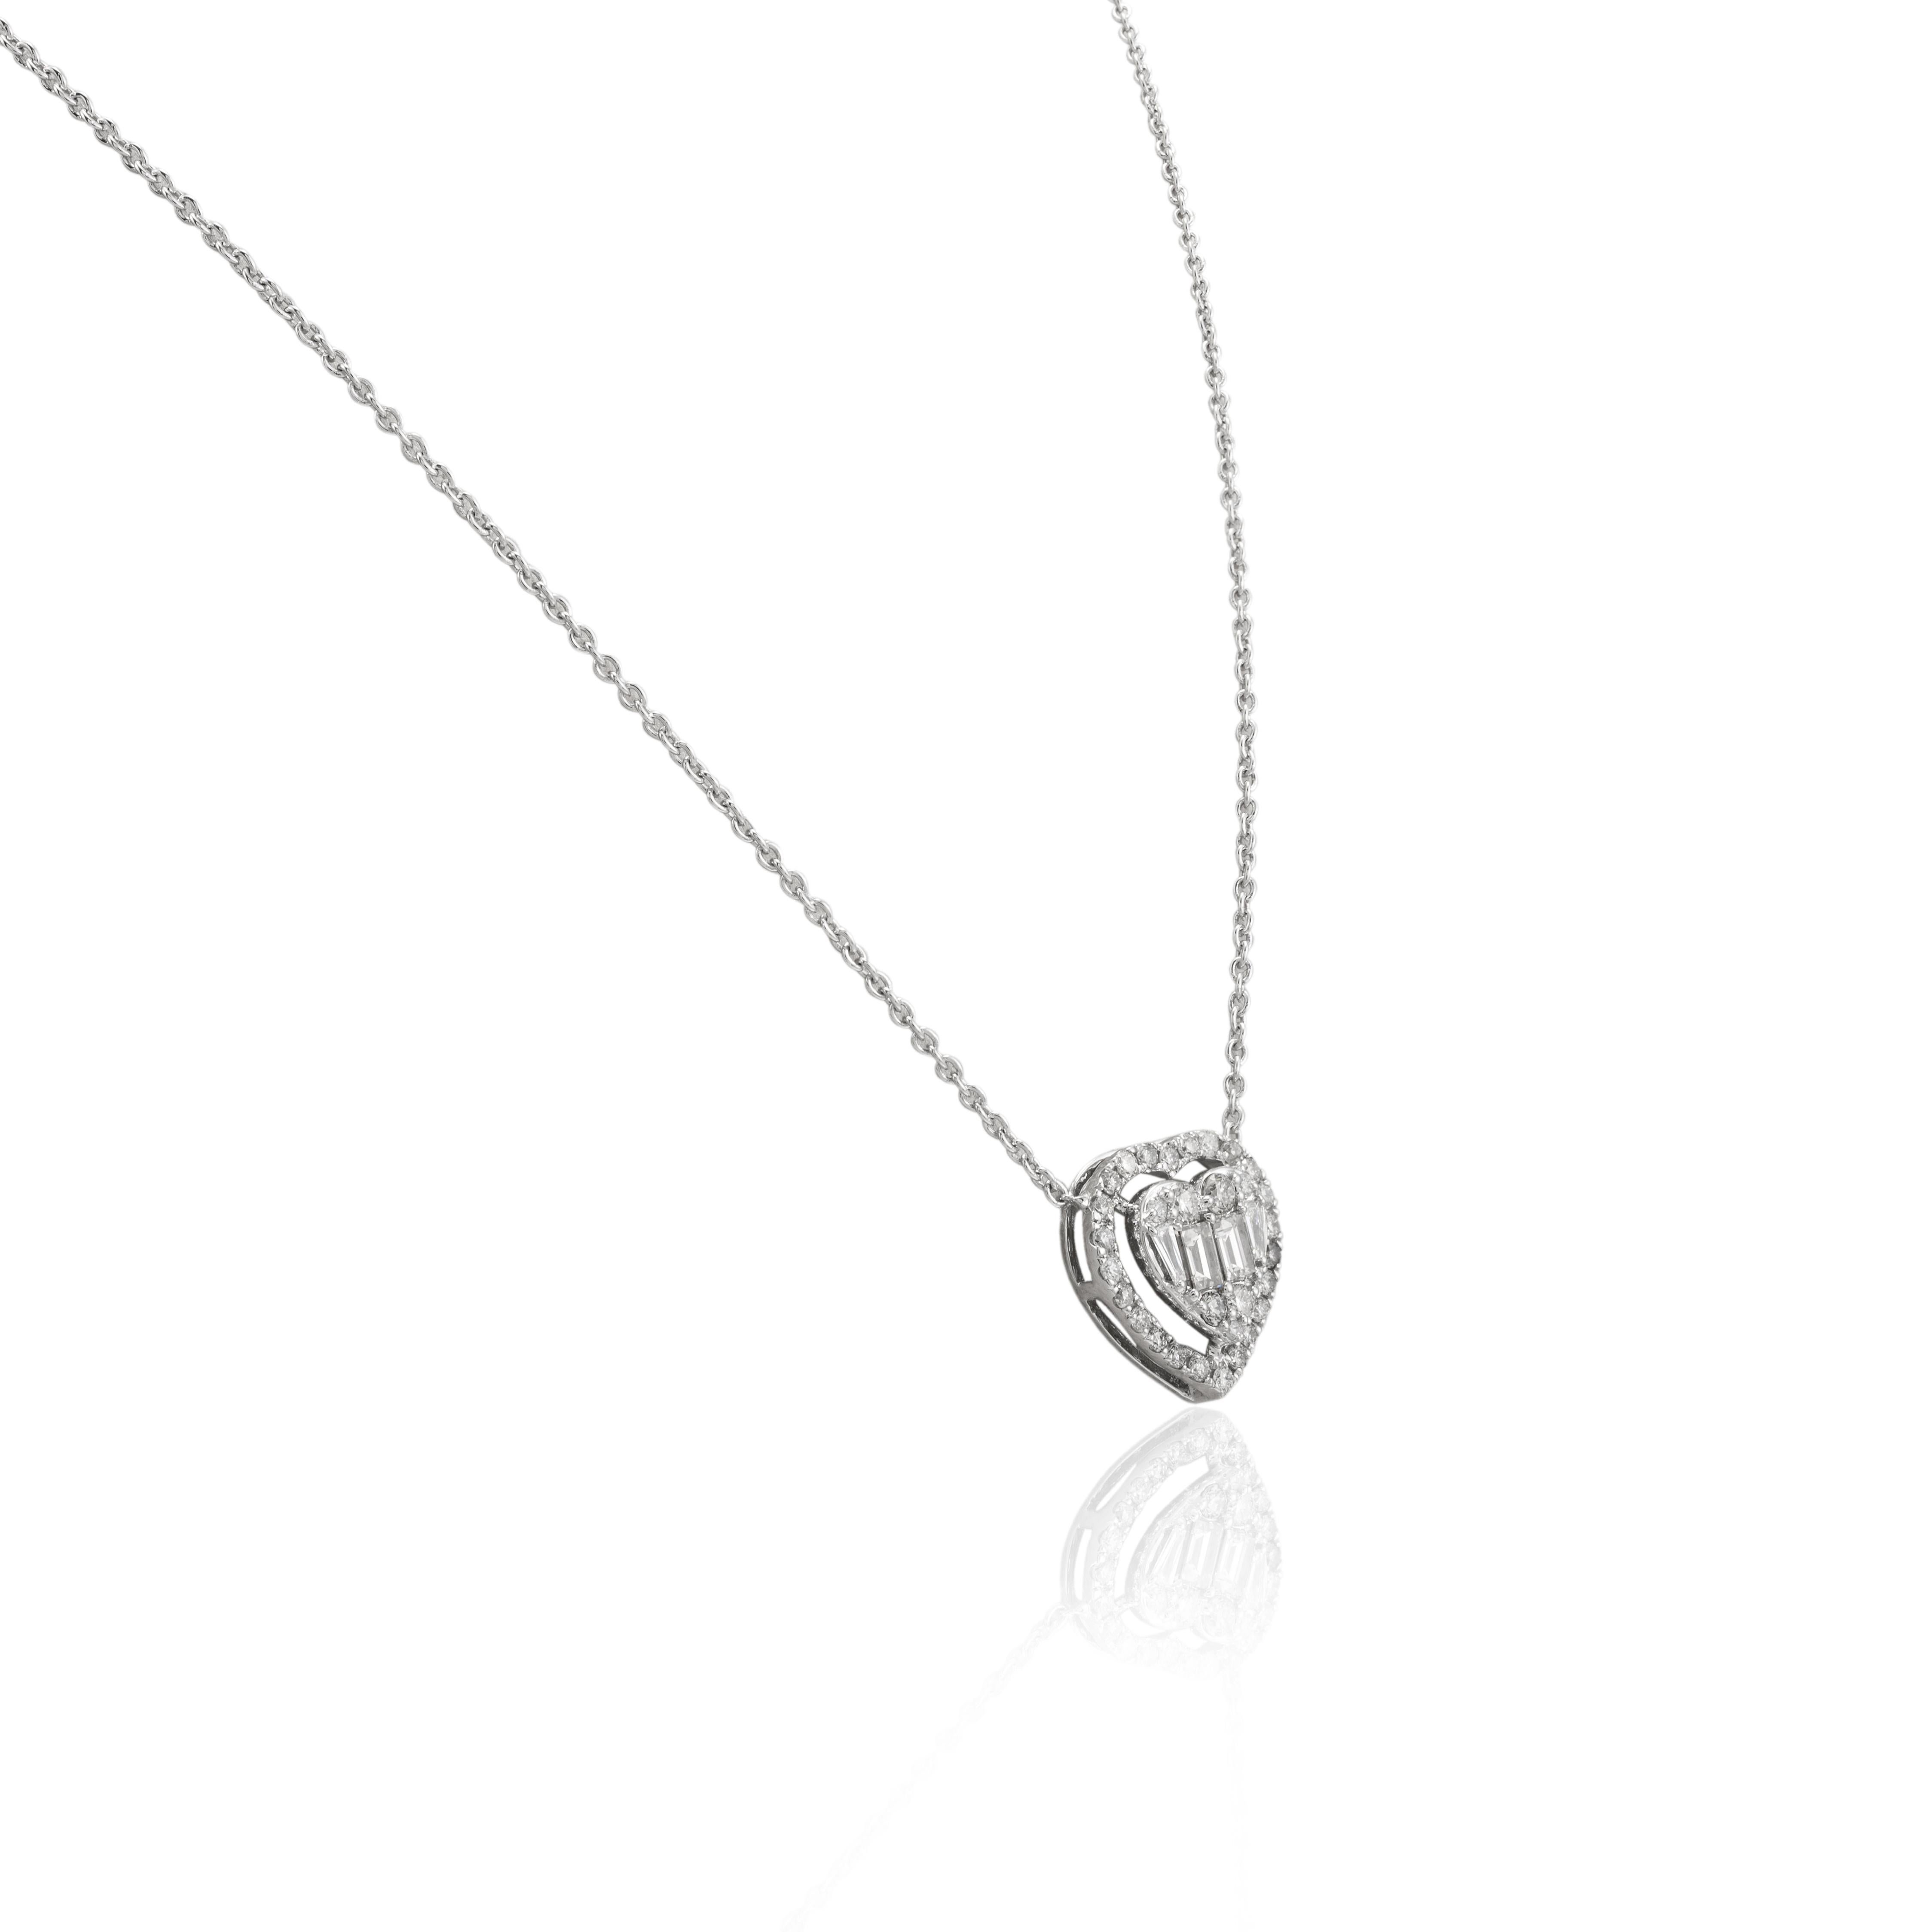 Heart Diamond Pendant Necklace 18k Solid White Gold, Gift For Her Christmas For Sale 1